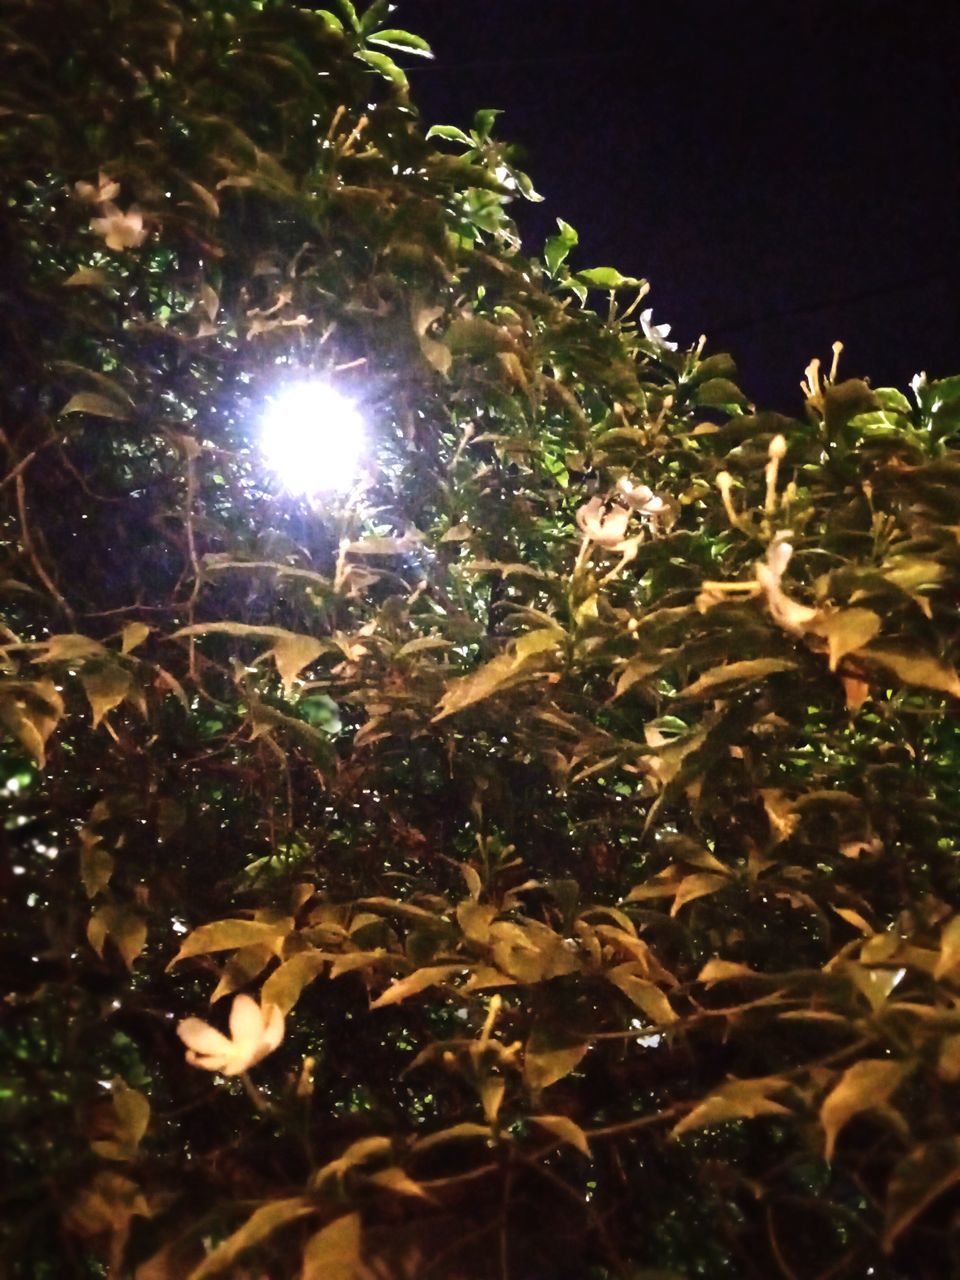 night, light, plant, tree, nature, low angle view, leaf, no people, illuminated, growth, branch, lens flare, sky, flower, plant part, outdoors, darkness, beauty in nature, autumn, tranquility, reflection, glowing